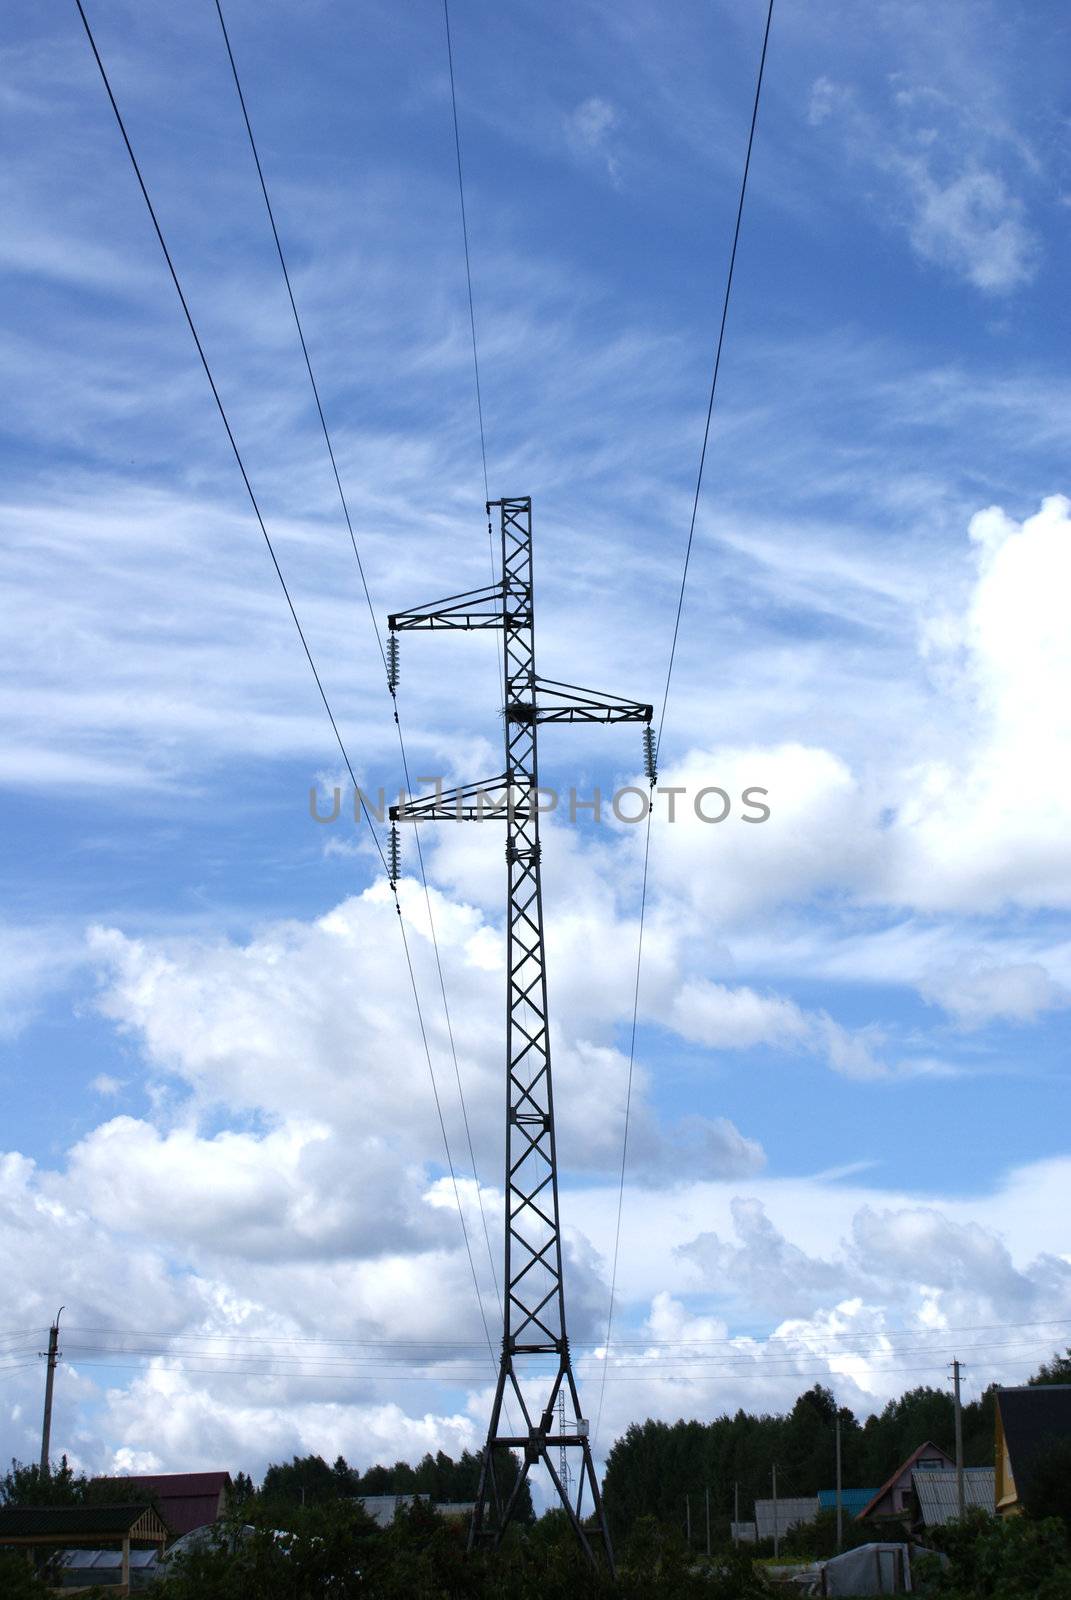 Power supply line in the countryside with blue sky on the background